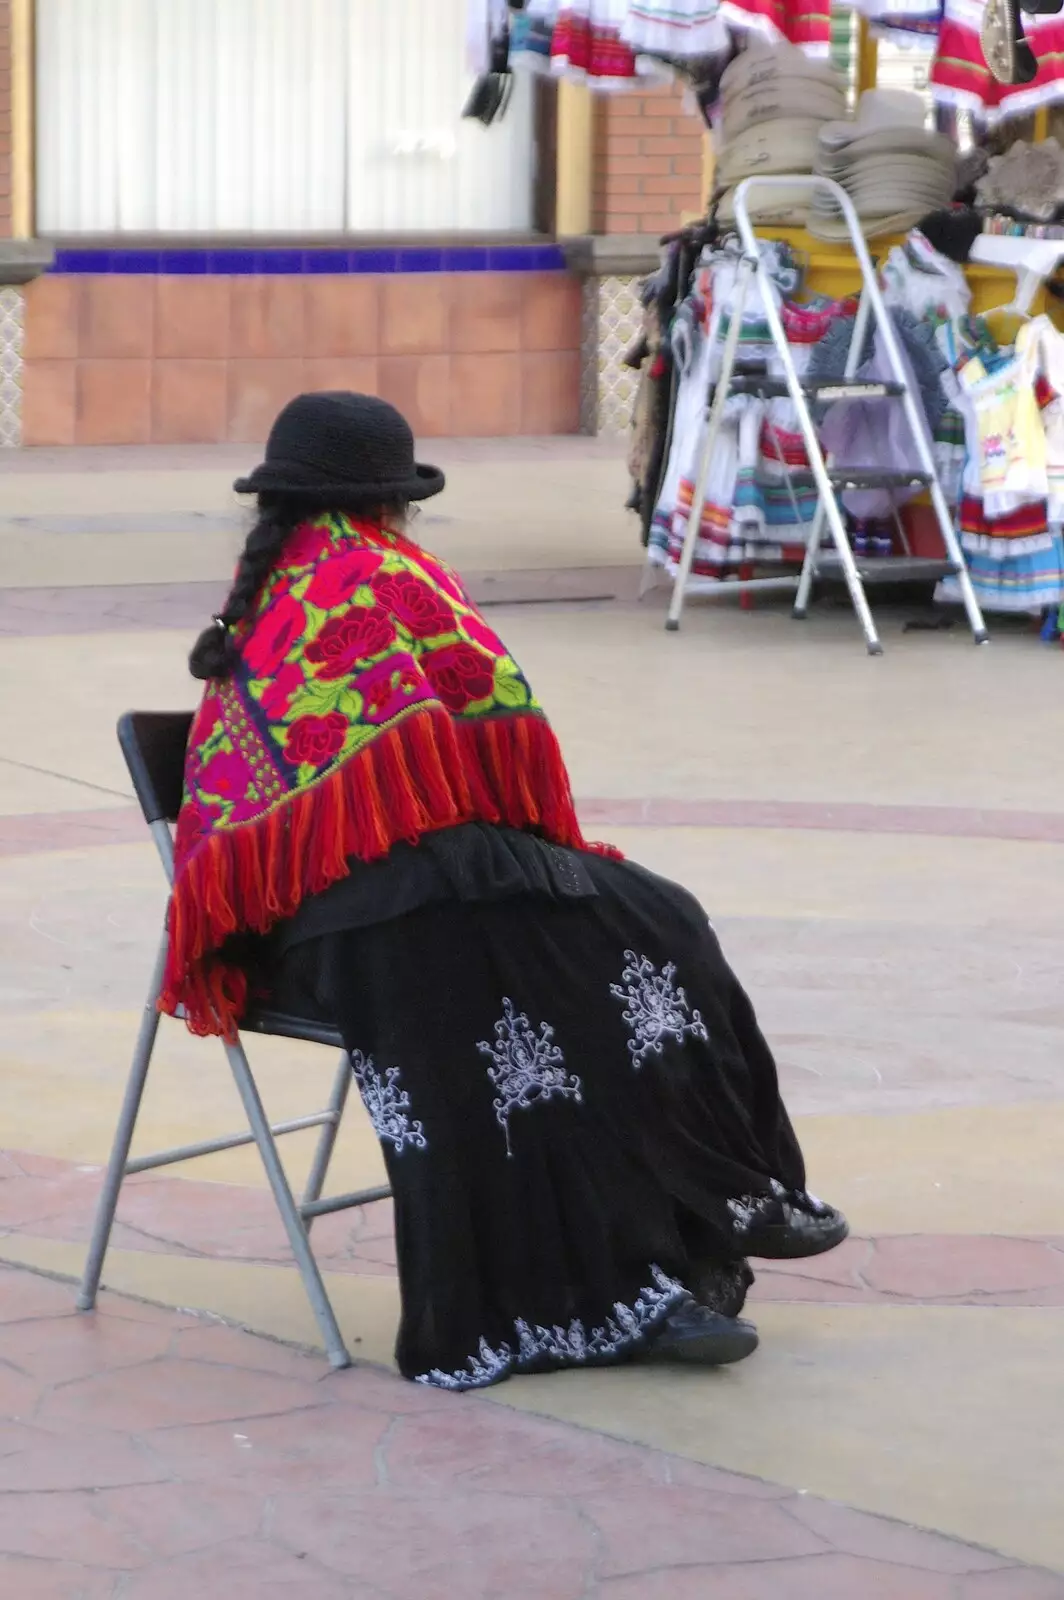 A woman in some sort of traditional garb waits, from Rosarito and Tijuana, Baja California, Mexico - 2nd March 2008